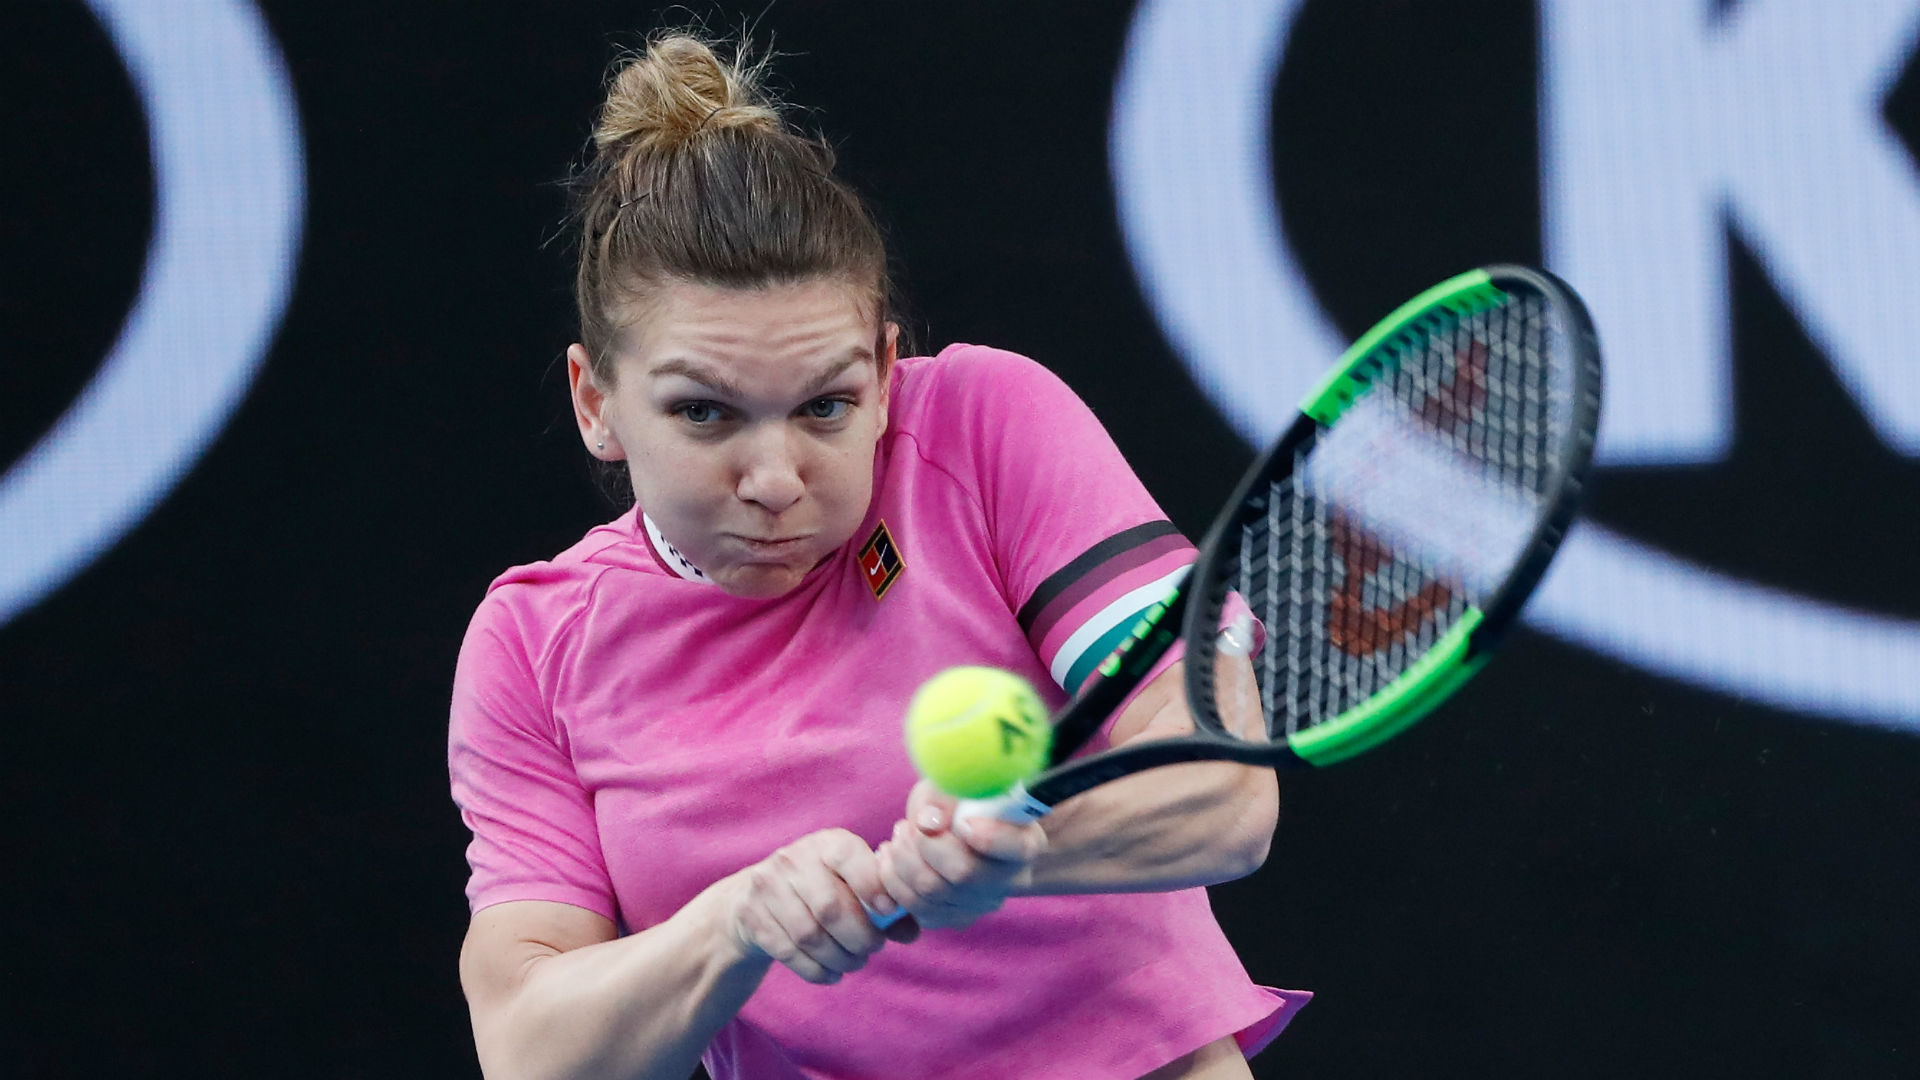 Simona Halep reached the final of last year's Australian Open, but the top seed says she does not feel any pressure this year.